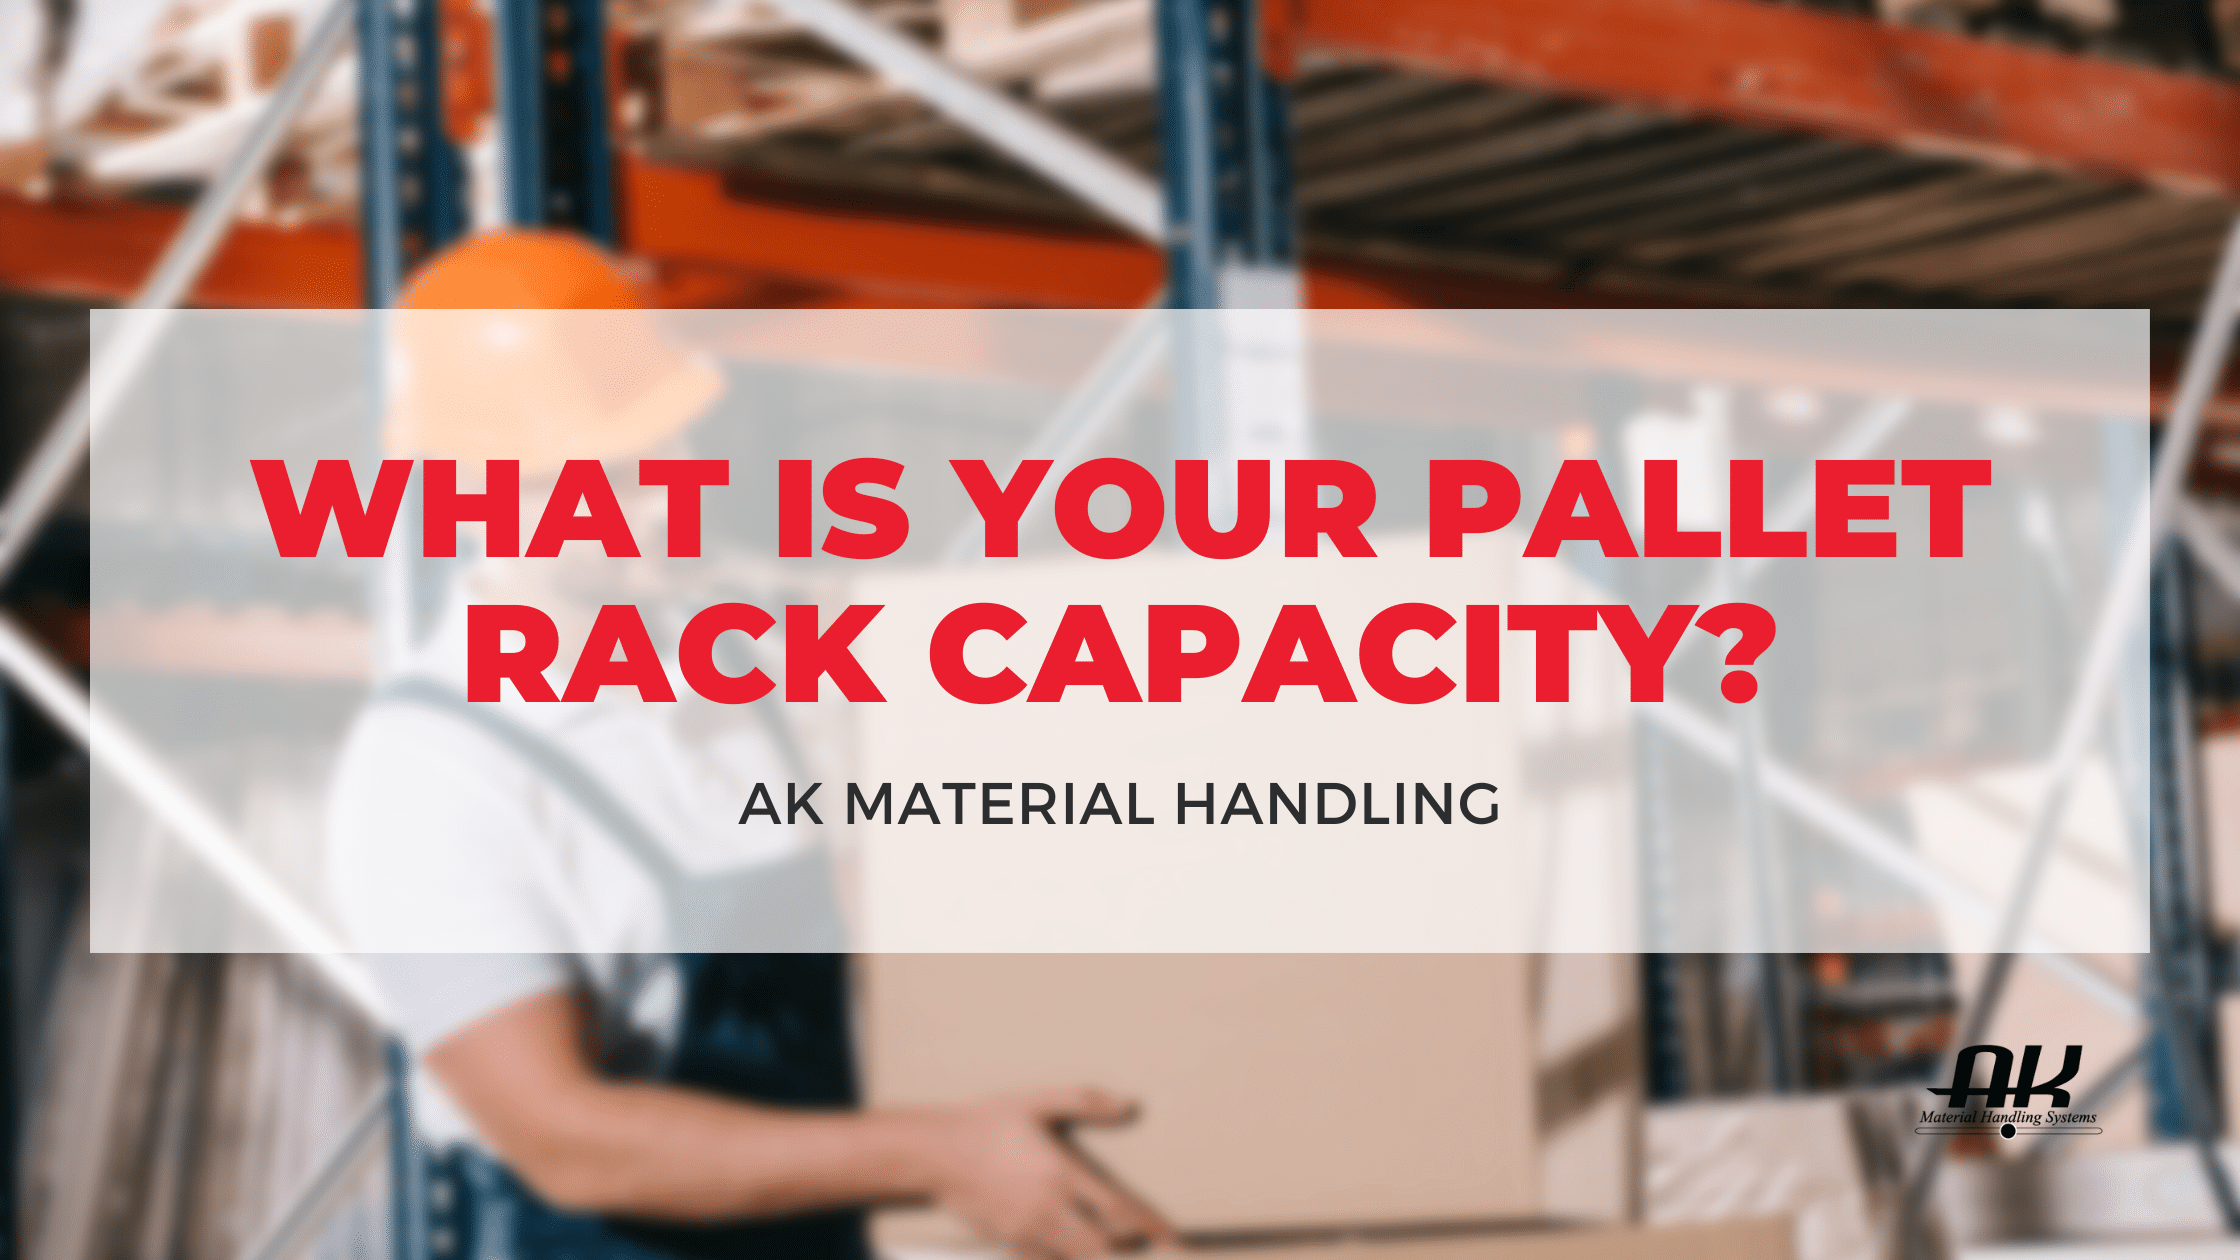 What is your pallet rack capacity?